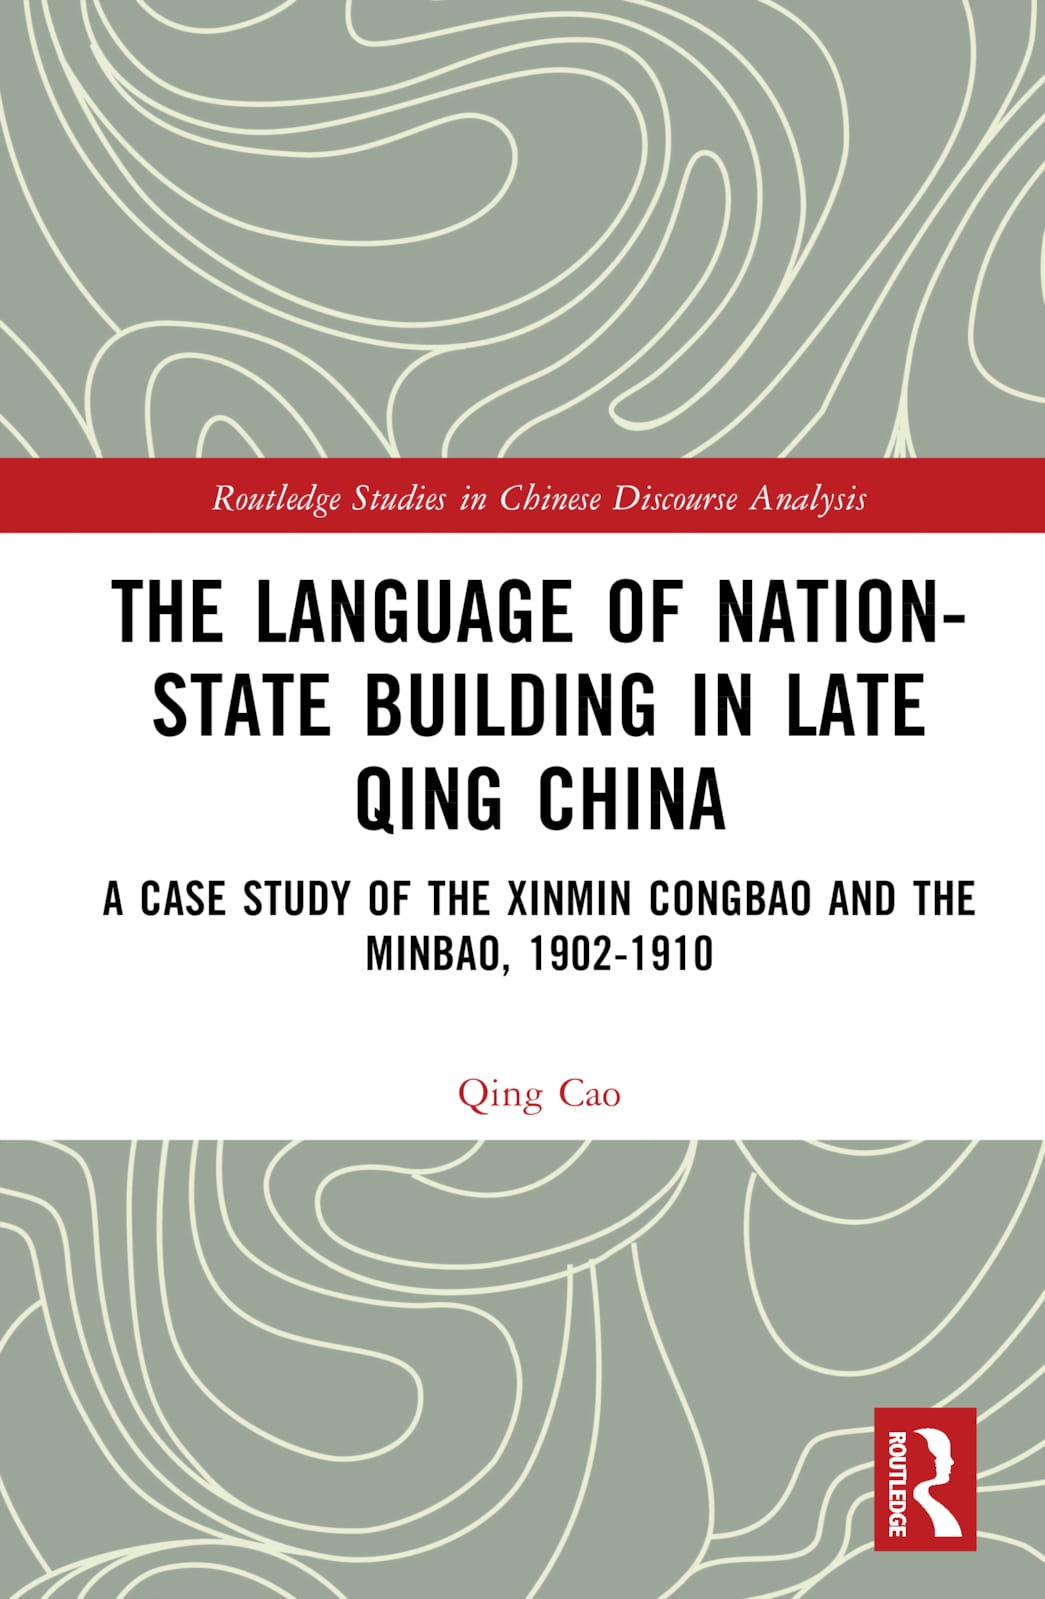 The Language of Nation-State Building in Late Qing China: A Case Study of the Xinmin Congbao and the Minbao, 1902-1910